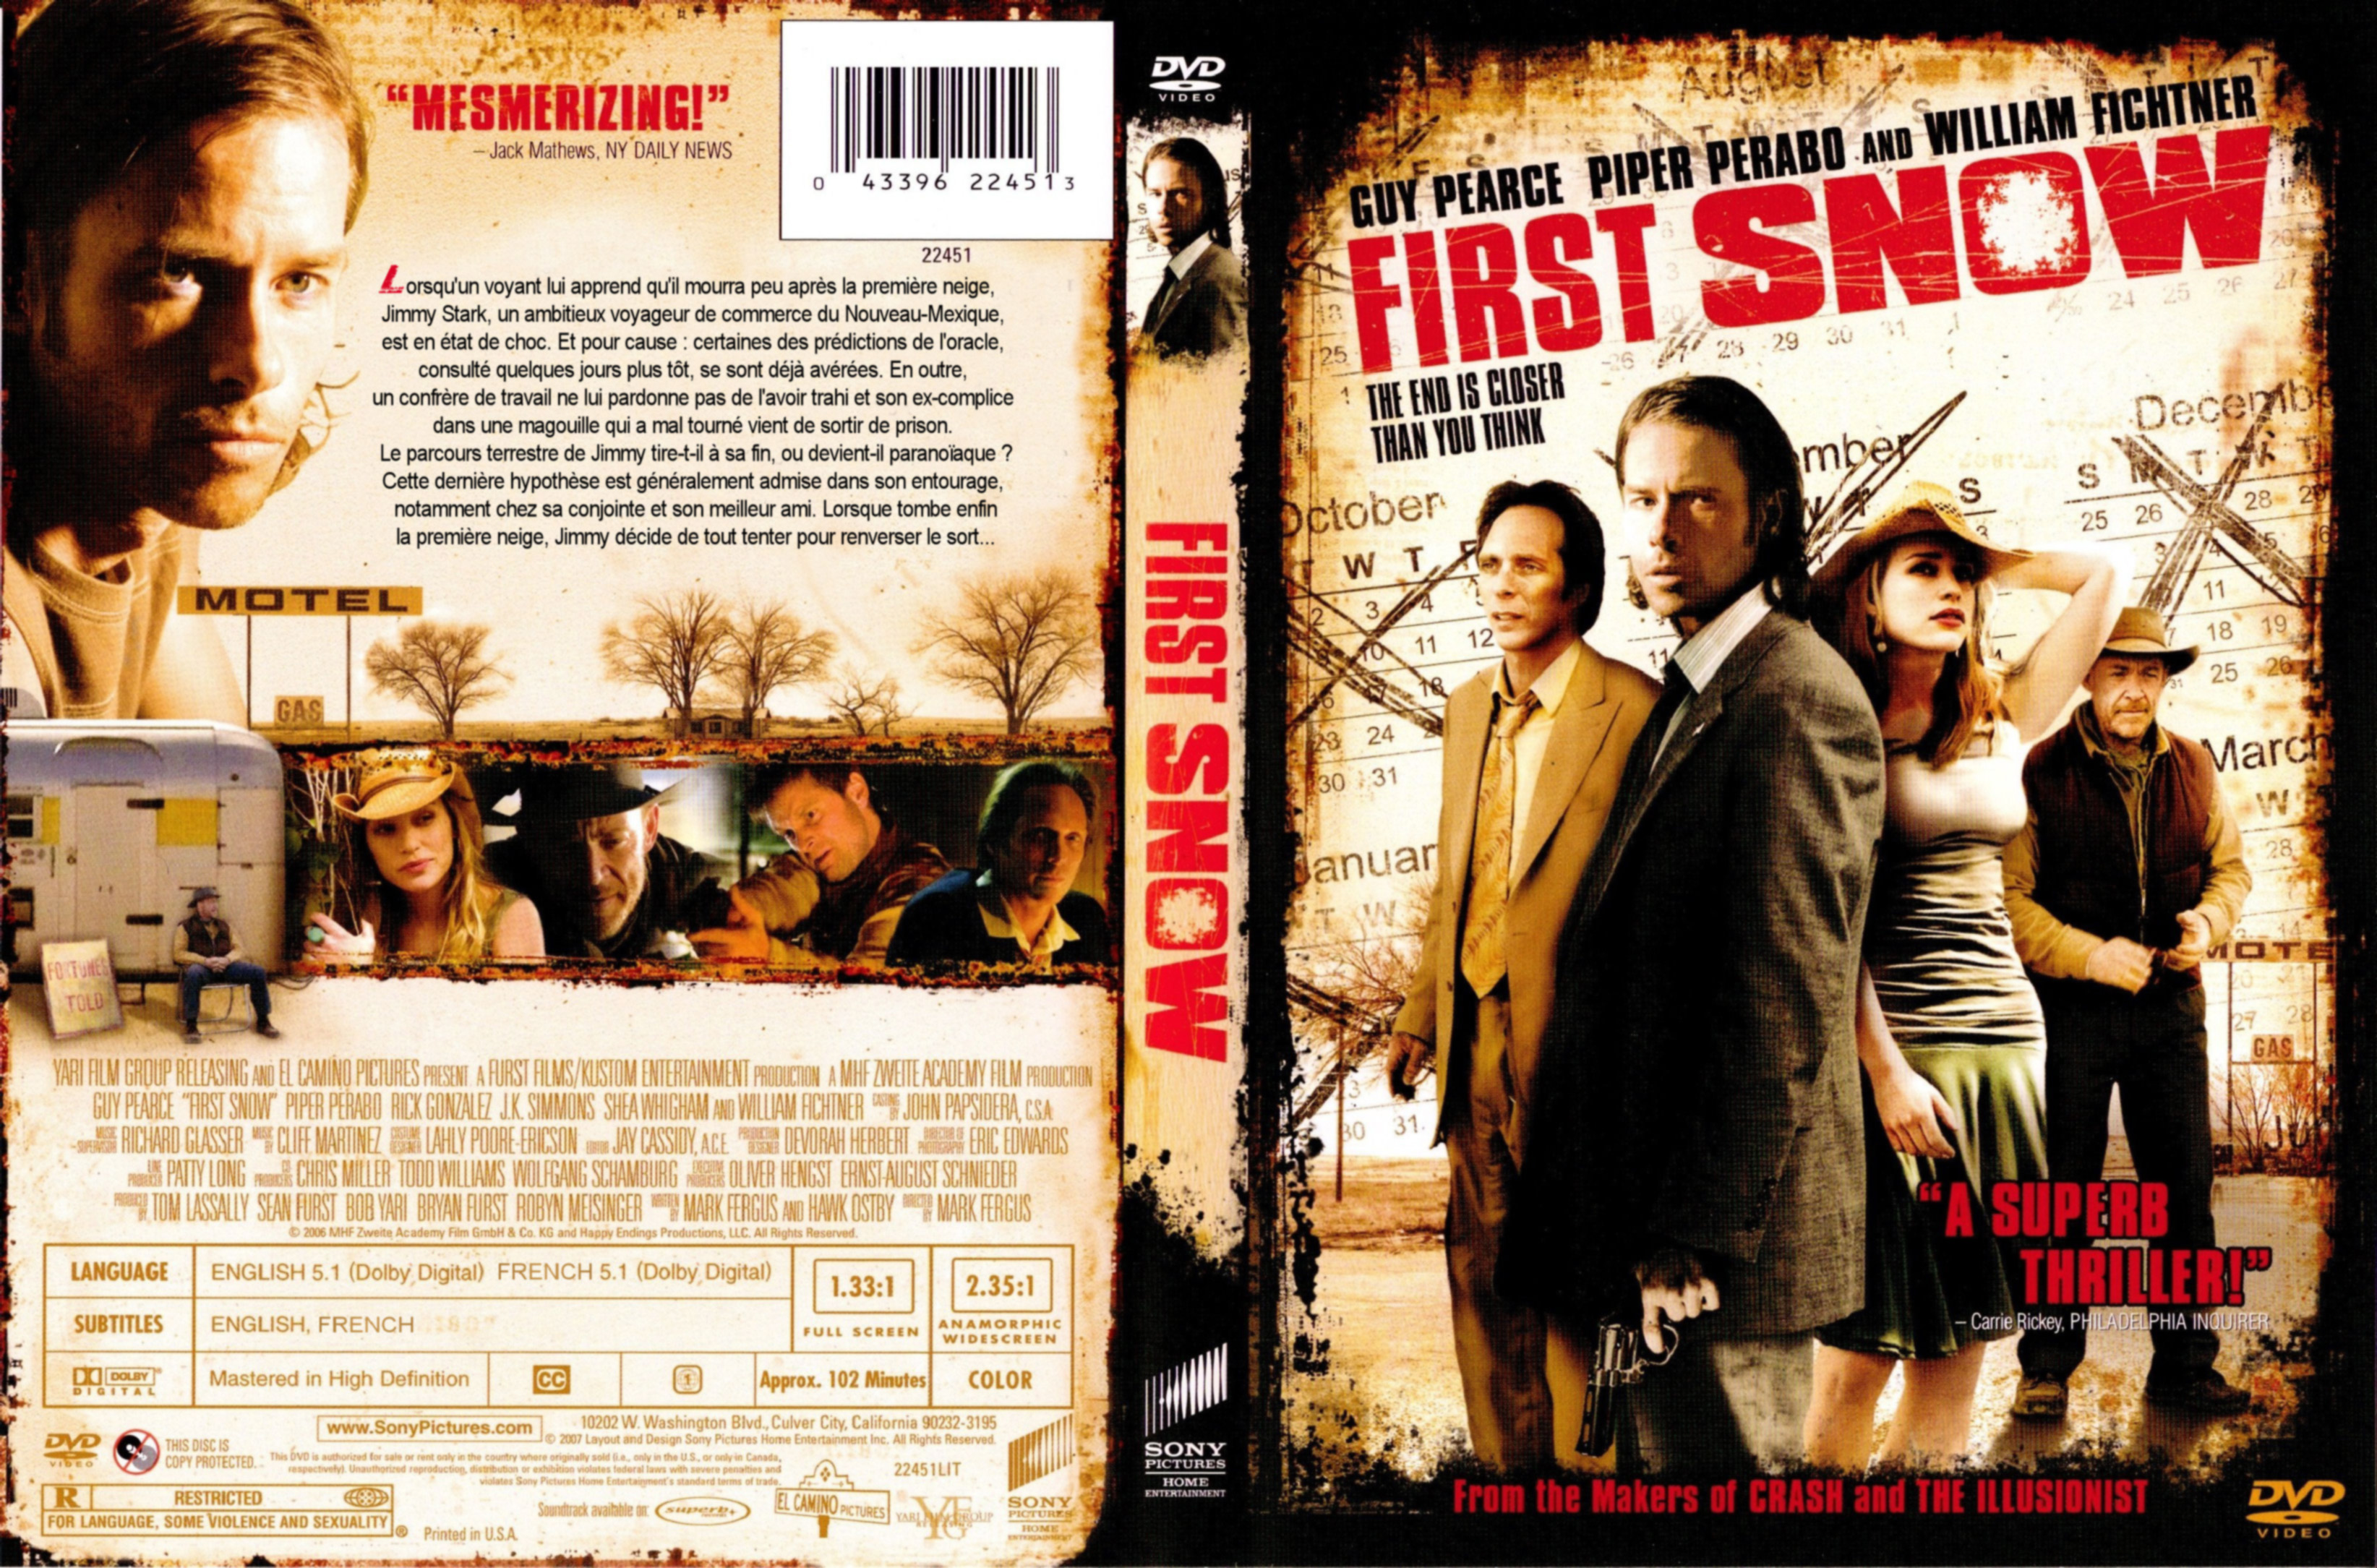 Jaquette DVD First Snow Zone 1